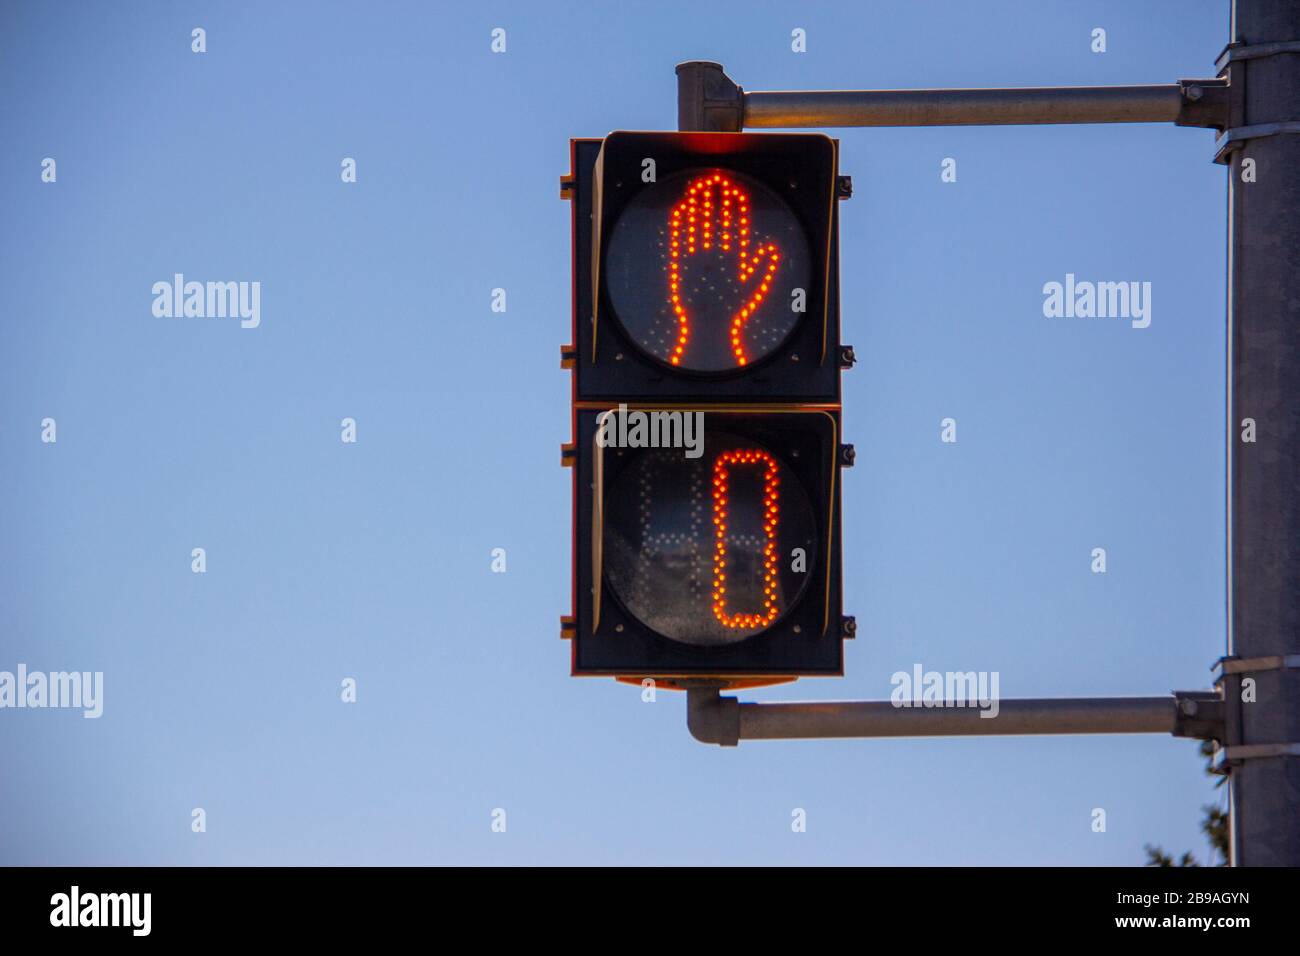 Pedestrian crossing light at 0 seconds Stock Photo